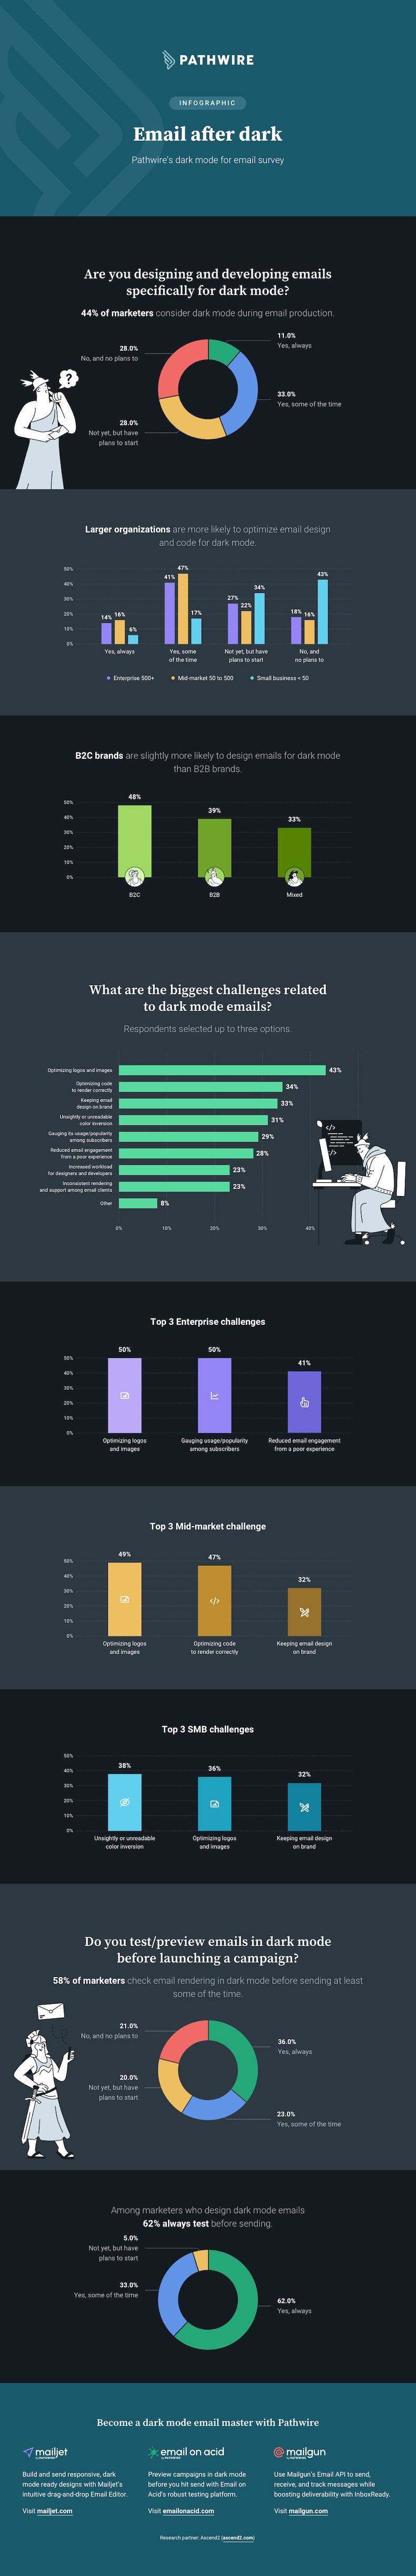 How marketers approach dark mode for email infographic